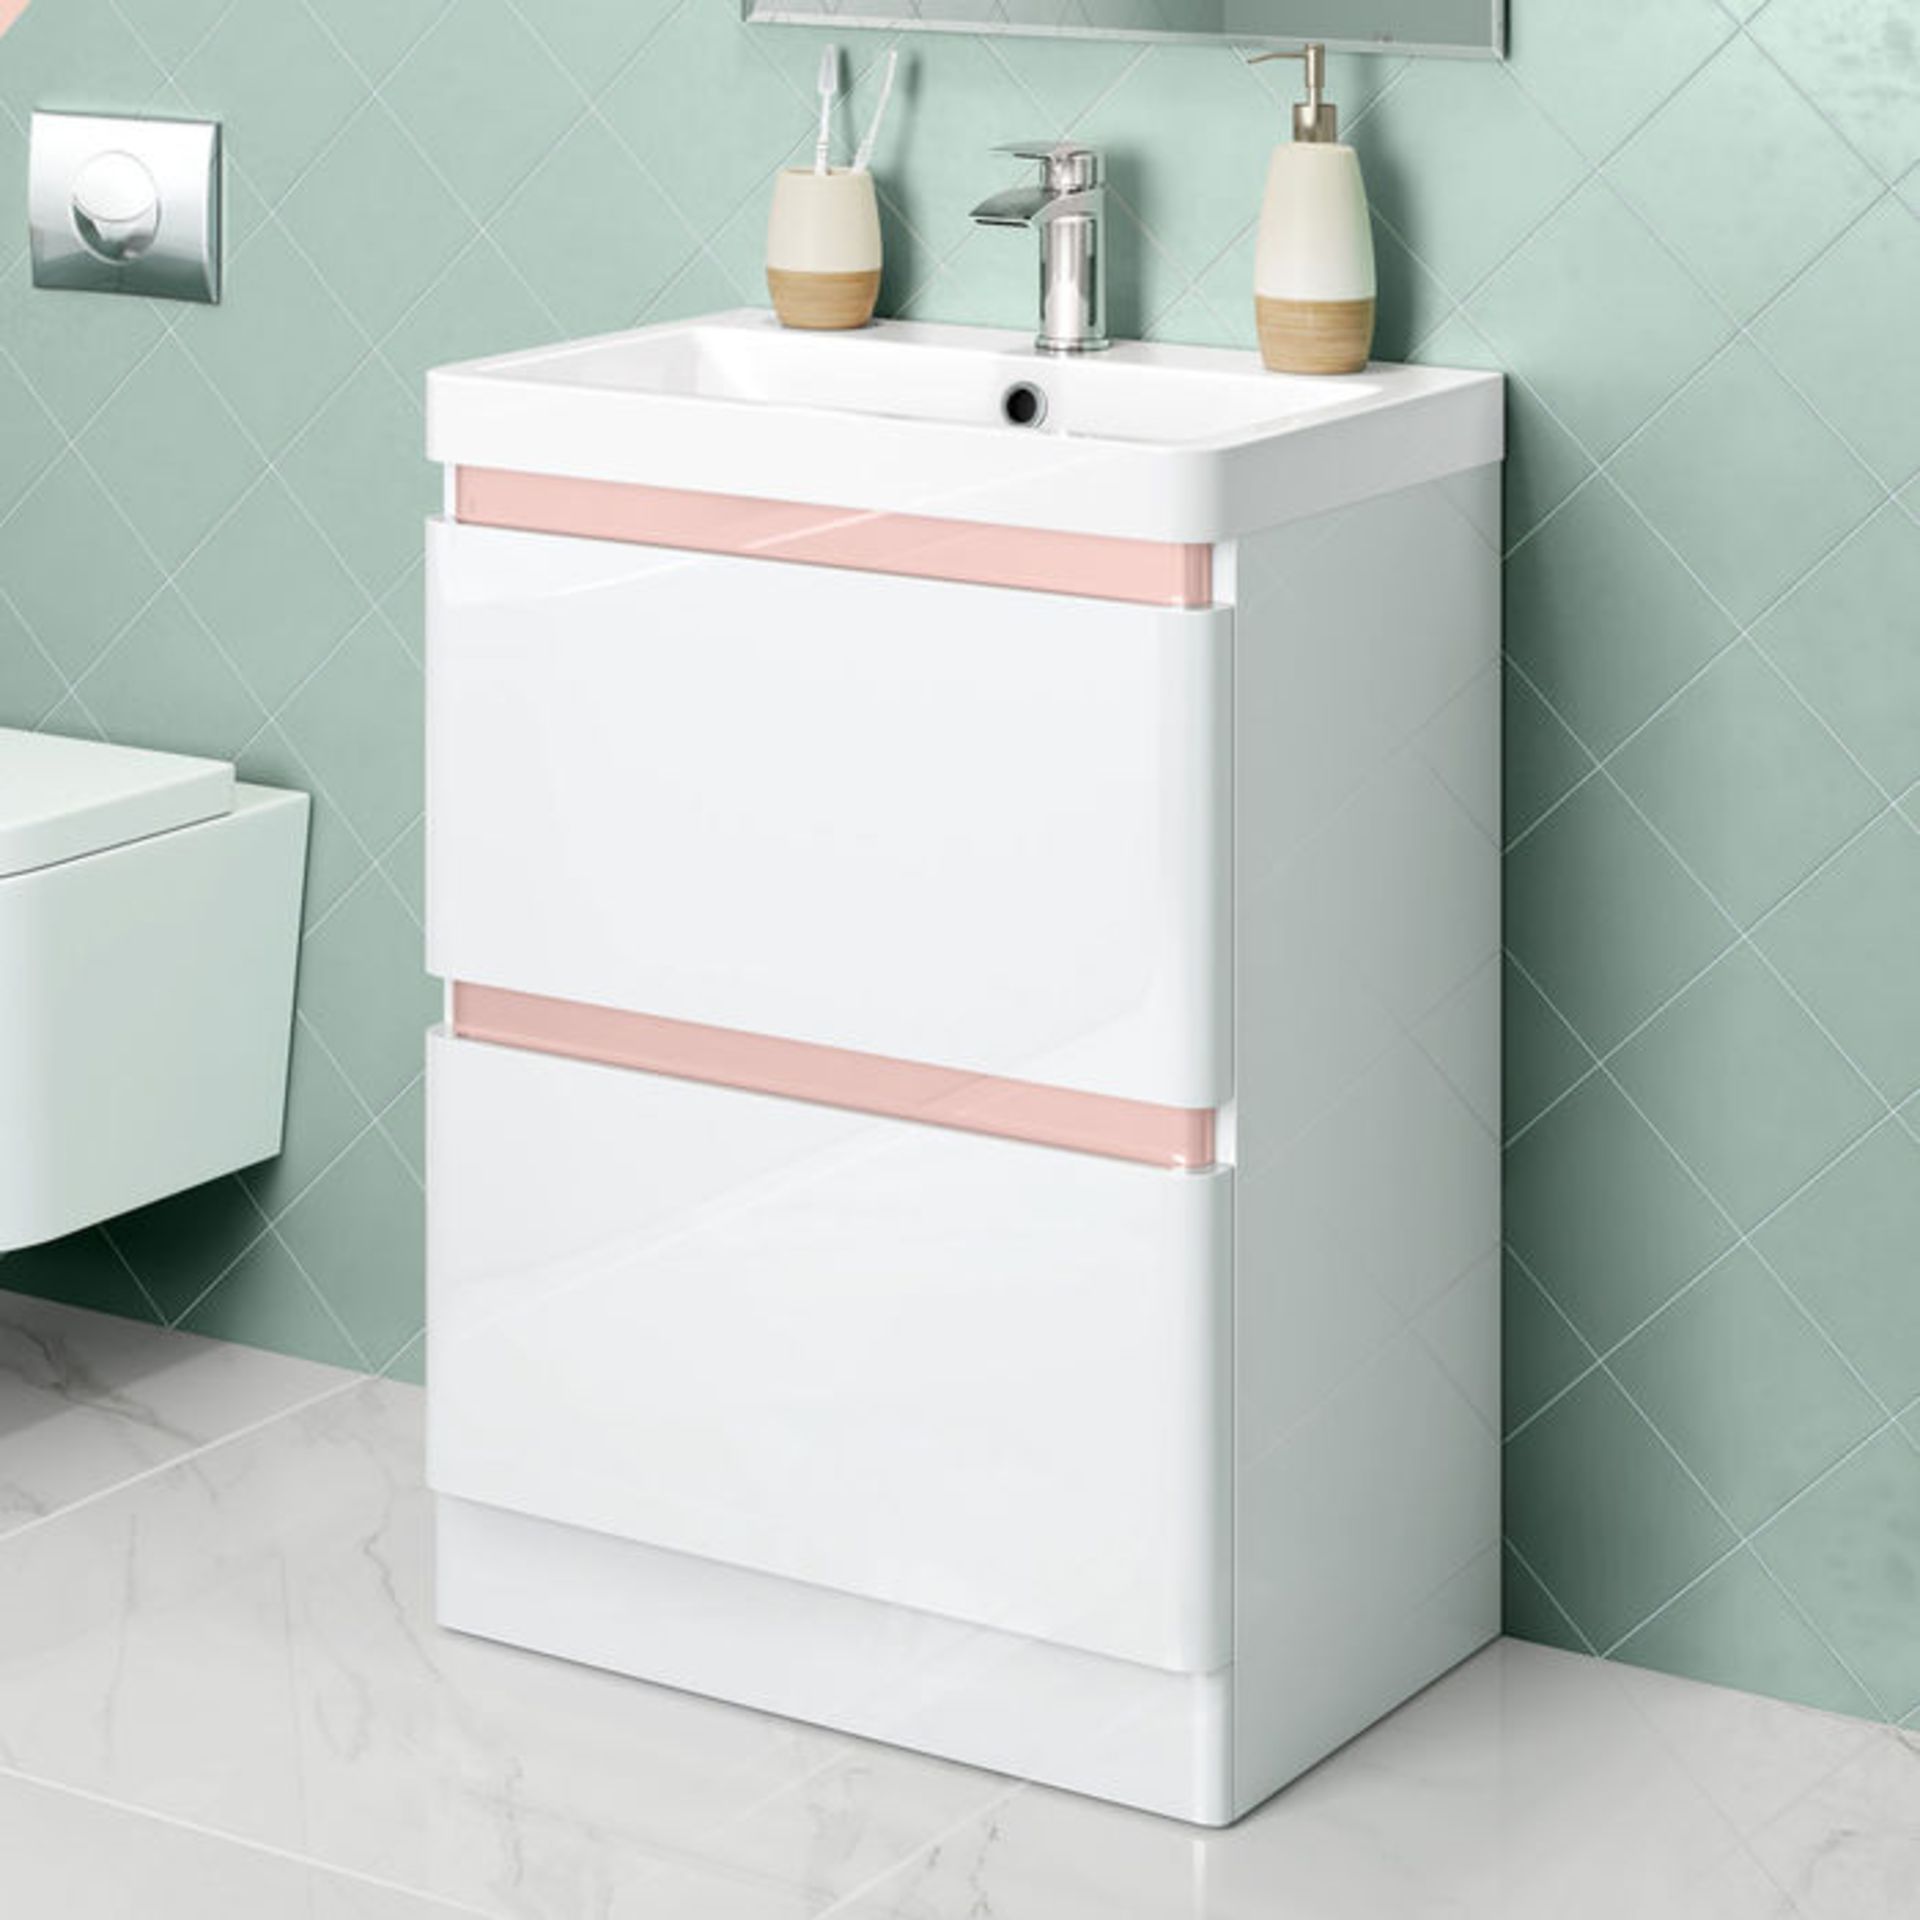 New & Boxed 600mm Denver Floor Standing Vanity Unit - Rose Gold Edition. RRP £749.99.Comes Complete